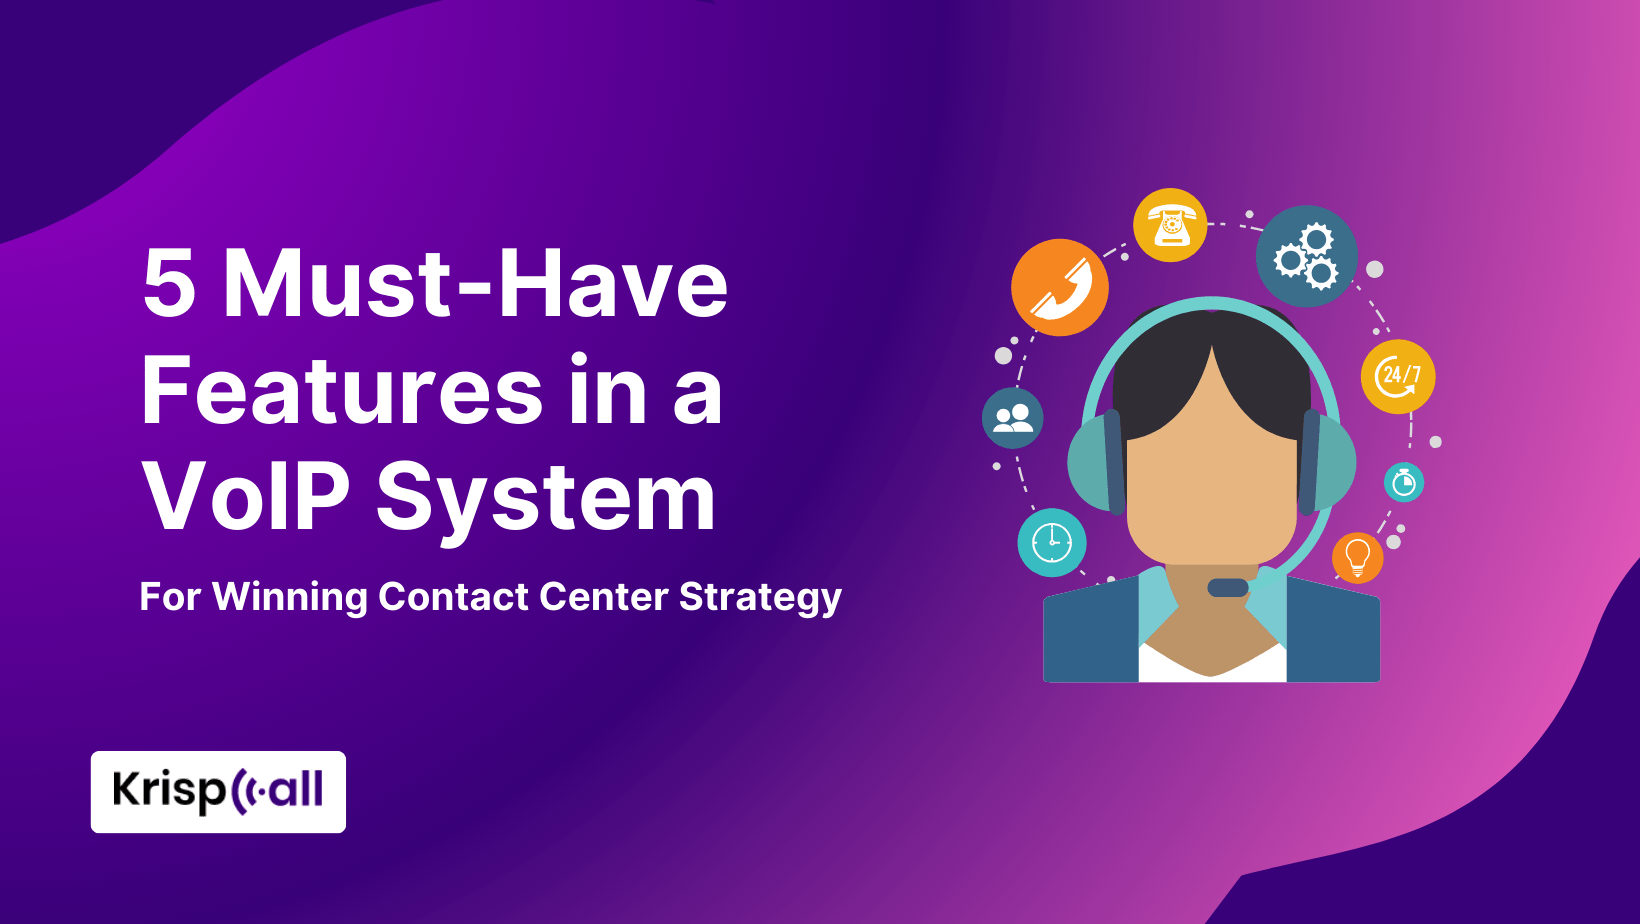 5 Must Have Features in VoIP System for Winning Contact Center Strategy